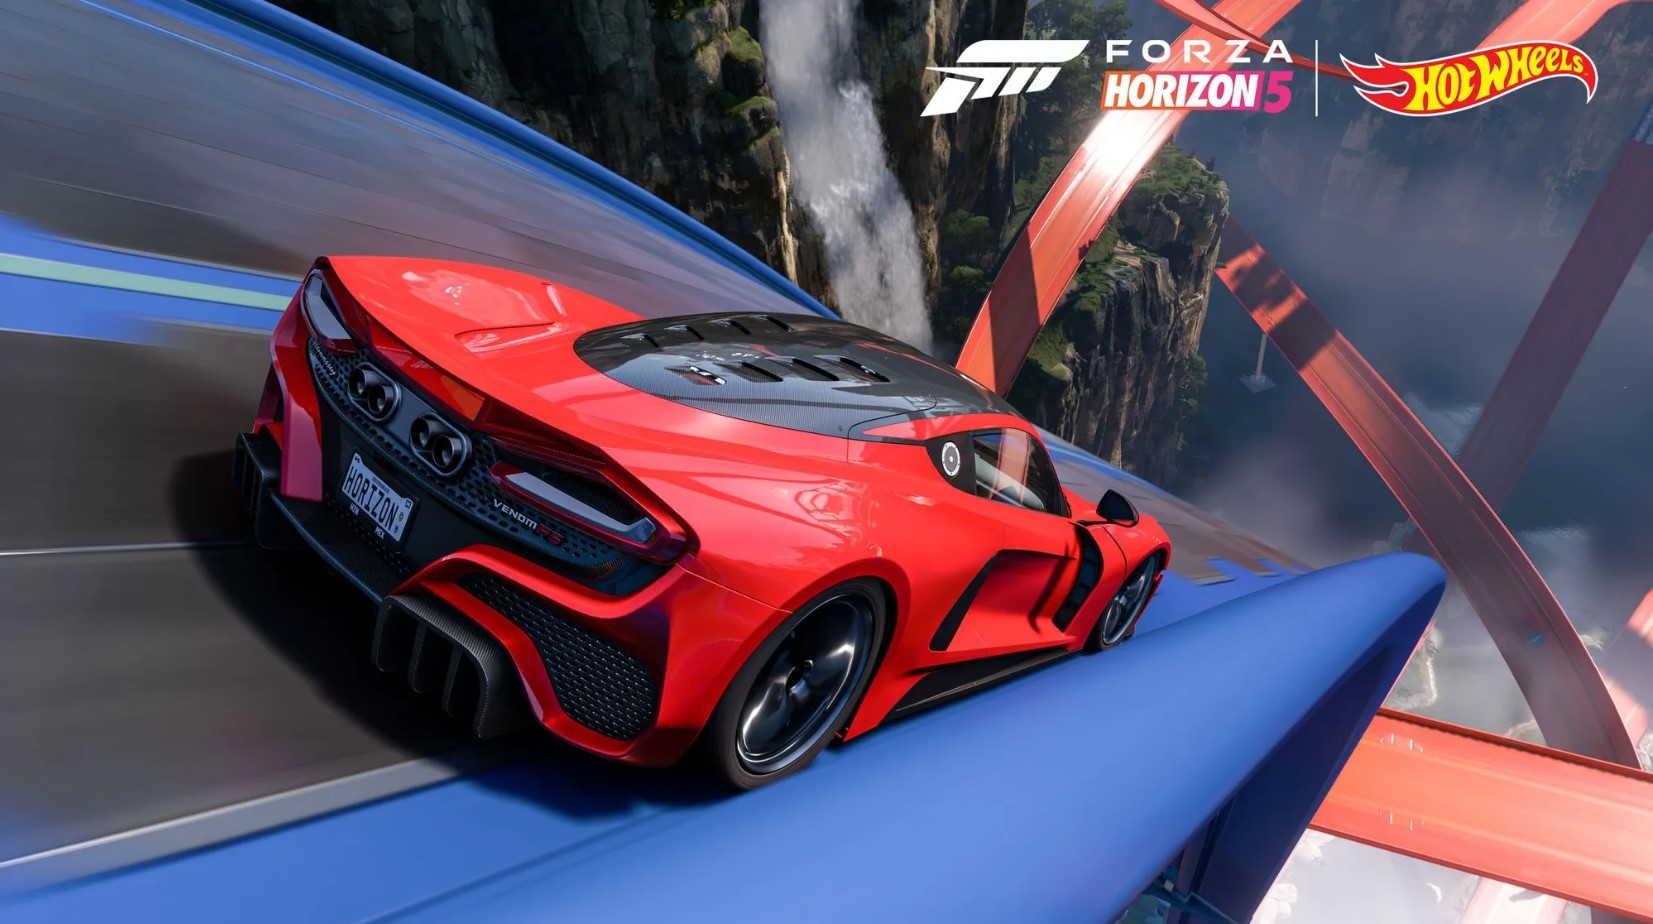 Forza Horizon 5 Hot Wheels Expansion Looks To Be A Killer Experience 